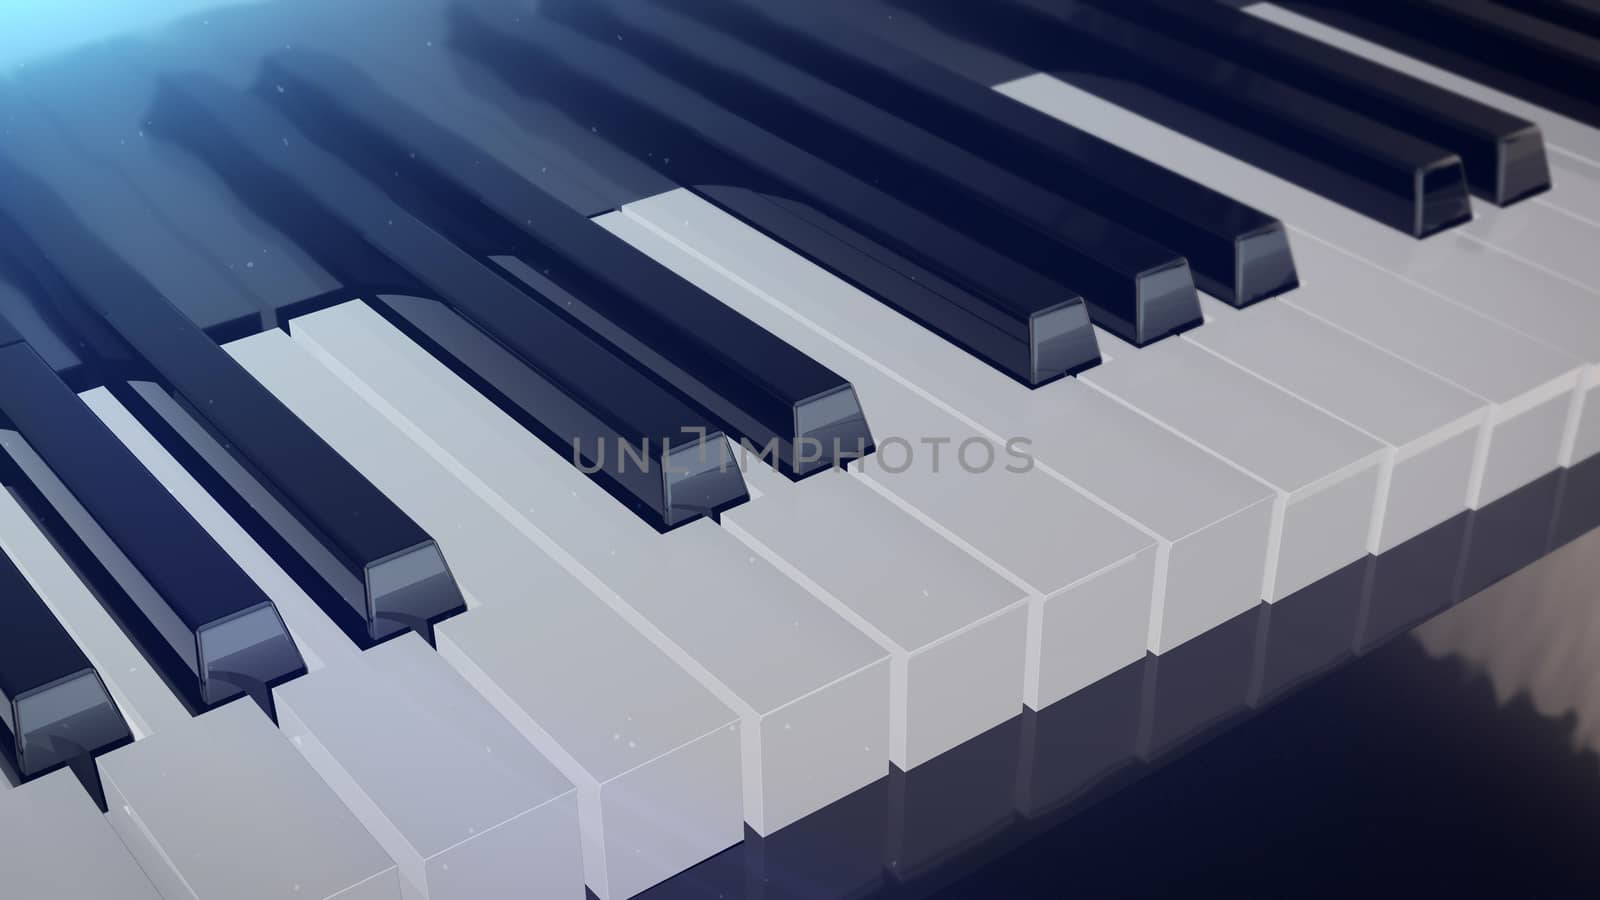 3d rendering of Beautiful Grand Piano Keys with mirror reflections.